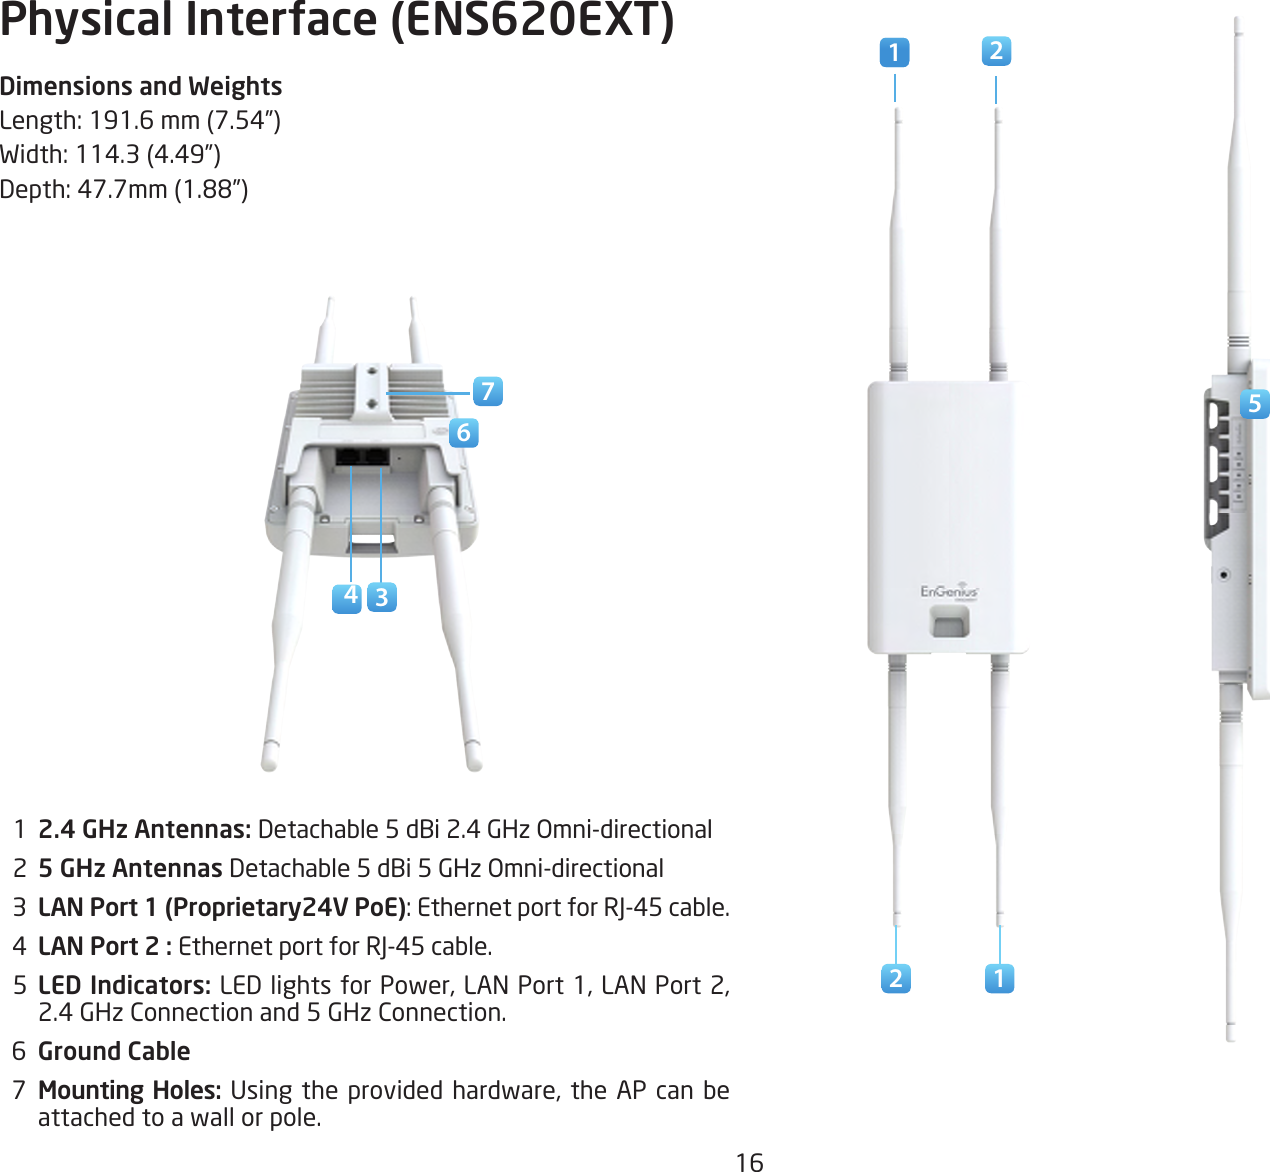 16Physical Interface (ENS620EXT)Dimensions and WeightsLength:191.6mm(7.54”)Width:114.3(4.49”)Depth:47.7mm(1.88”)  1  2.4 GHz Antennas: Detachable 5 dBi 2.4 GHz Omni-directional  2  5 GHz Antennas Detachable 5 dBi 5 GHz Omni-directional  3  LAN Port 1 (Proprietary24V PoE):EthernetportforRJ-45cable.  4  LAN Port 2 : EthernetportforRJ-45cable.  5  LED Indicators: LEDlightsforPower,LANPort1,LANPort2,2.4 GHz Connection and 5 GHz Connection.  6  Ground Cable  7  Mounting Holes:Usingtheprovided hardware, the AP canbeattached to a wall or pole.1 6722 15341 